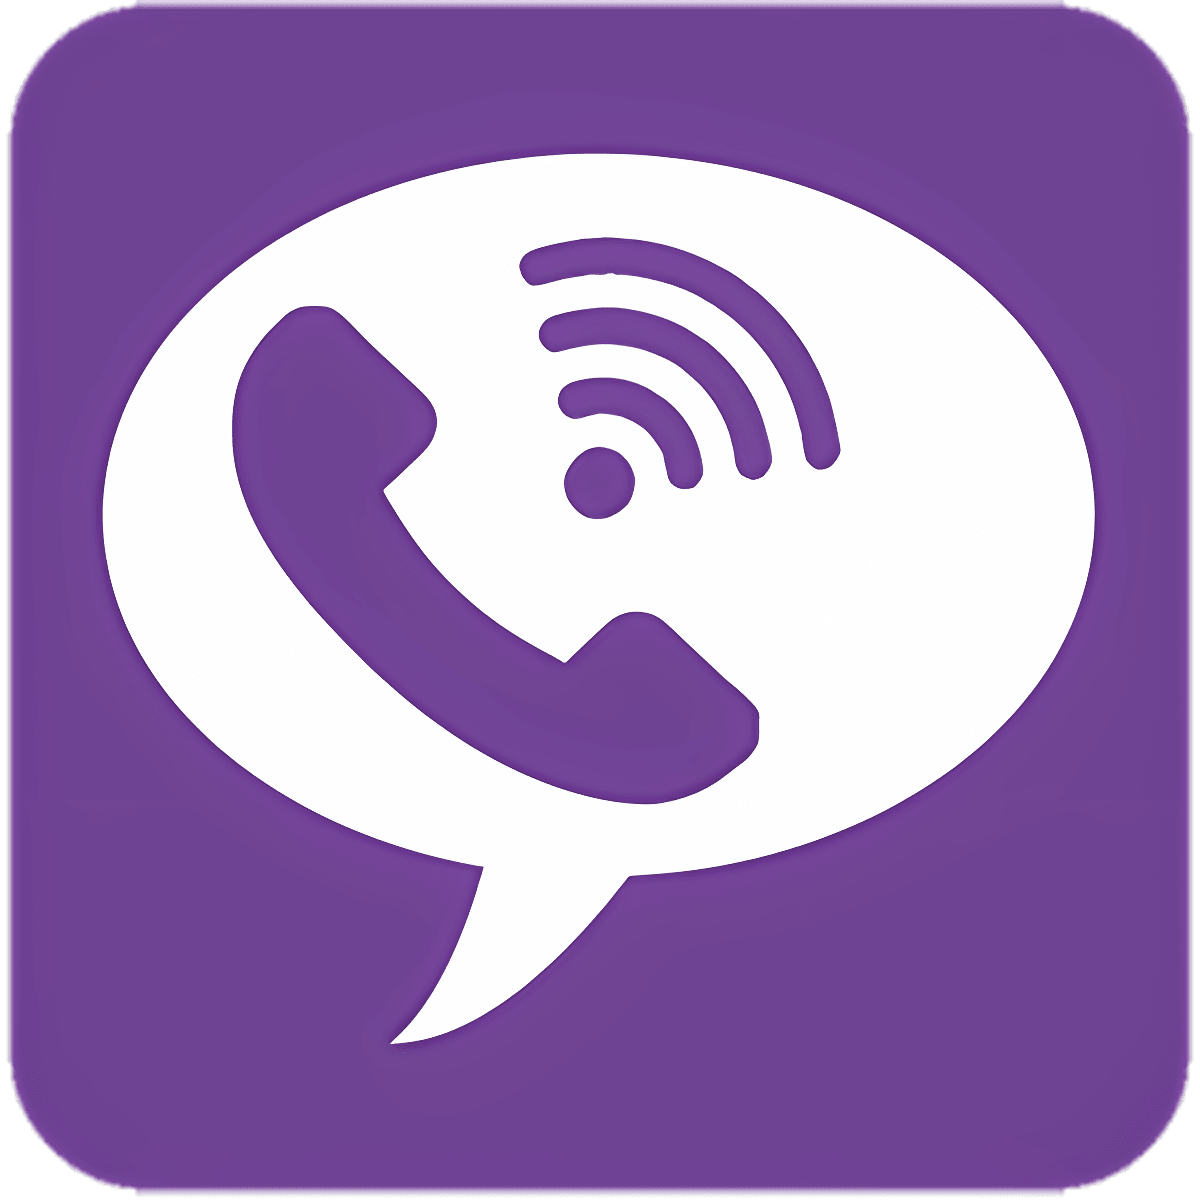 viber apps for android download